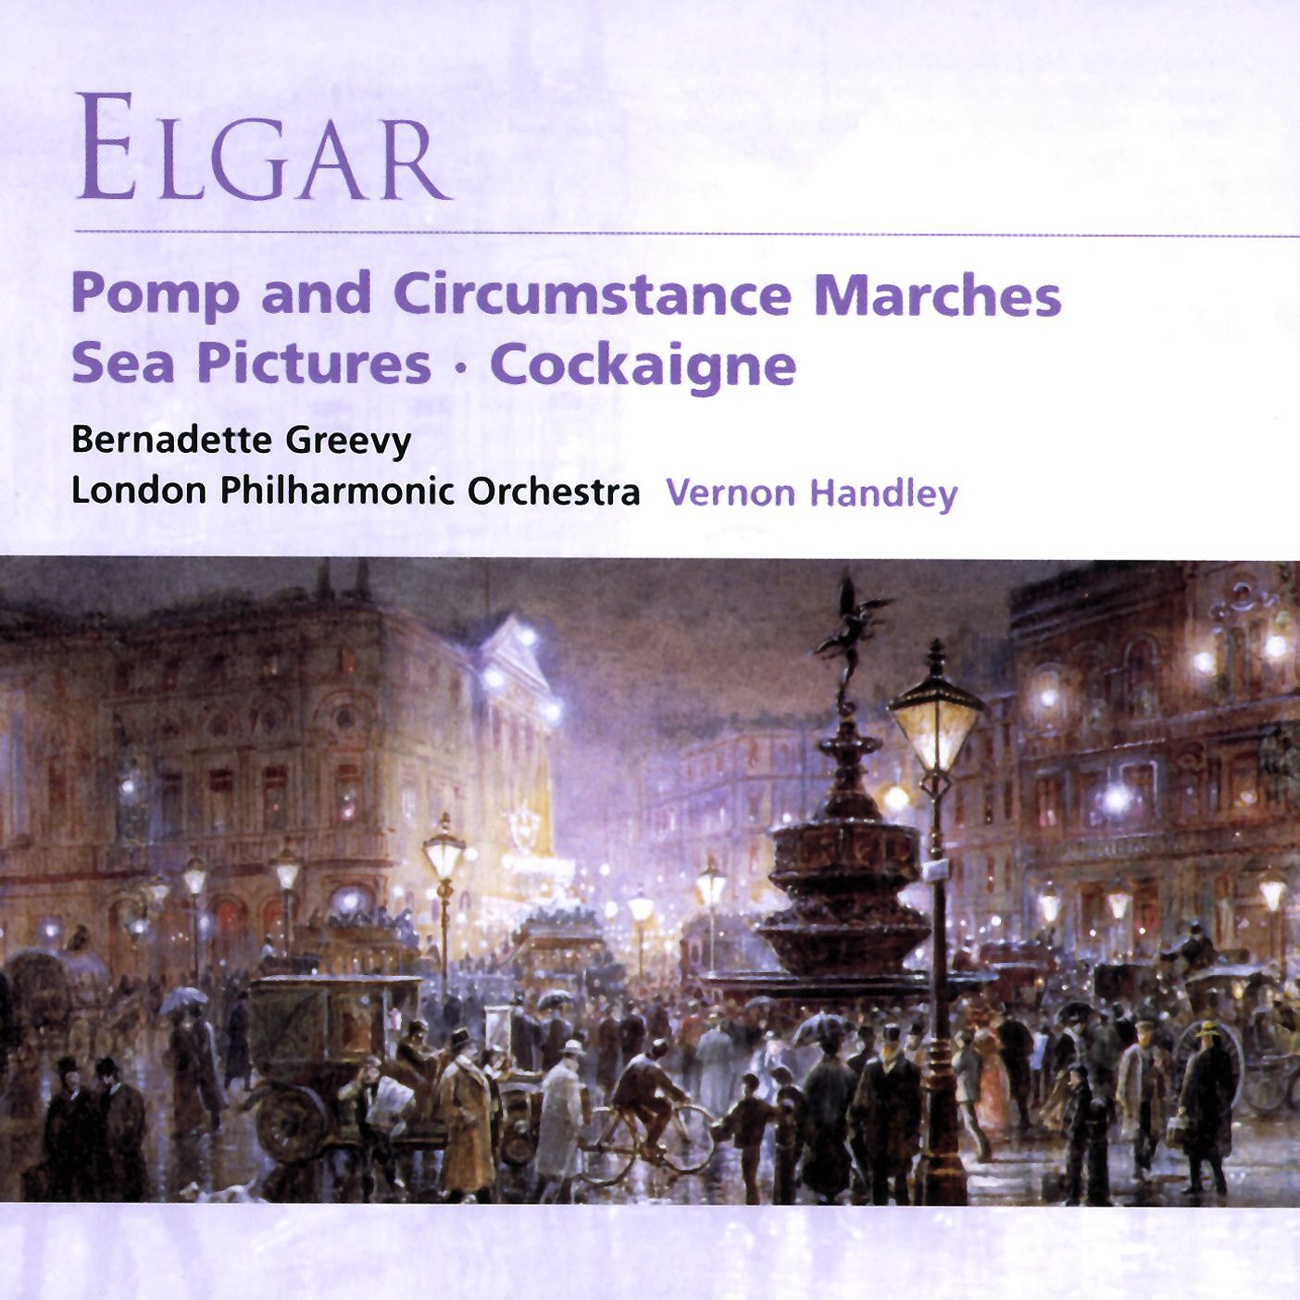 Pomp and Circumstance - Military Marches Op. 39:No. 5 in C